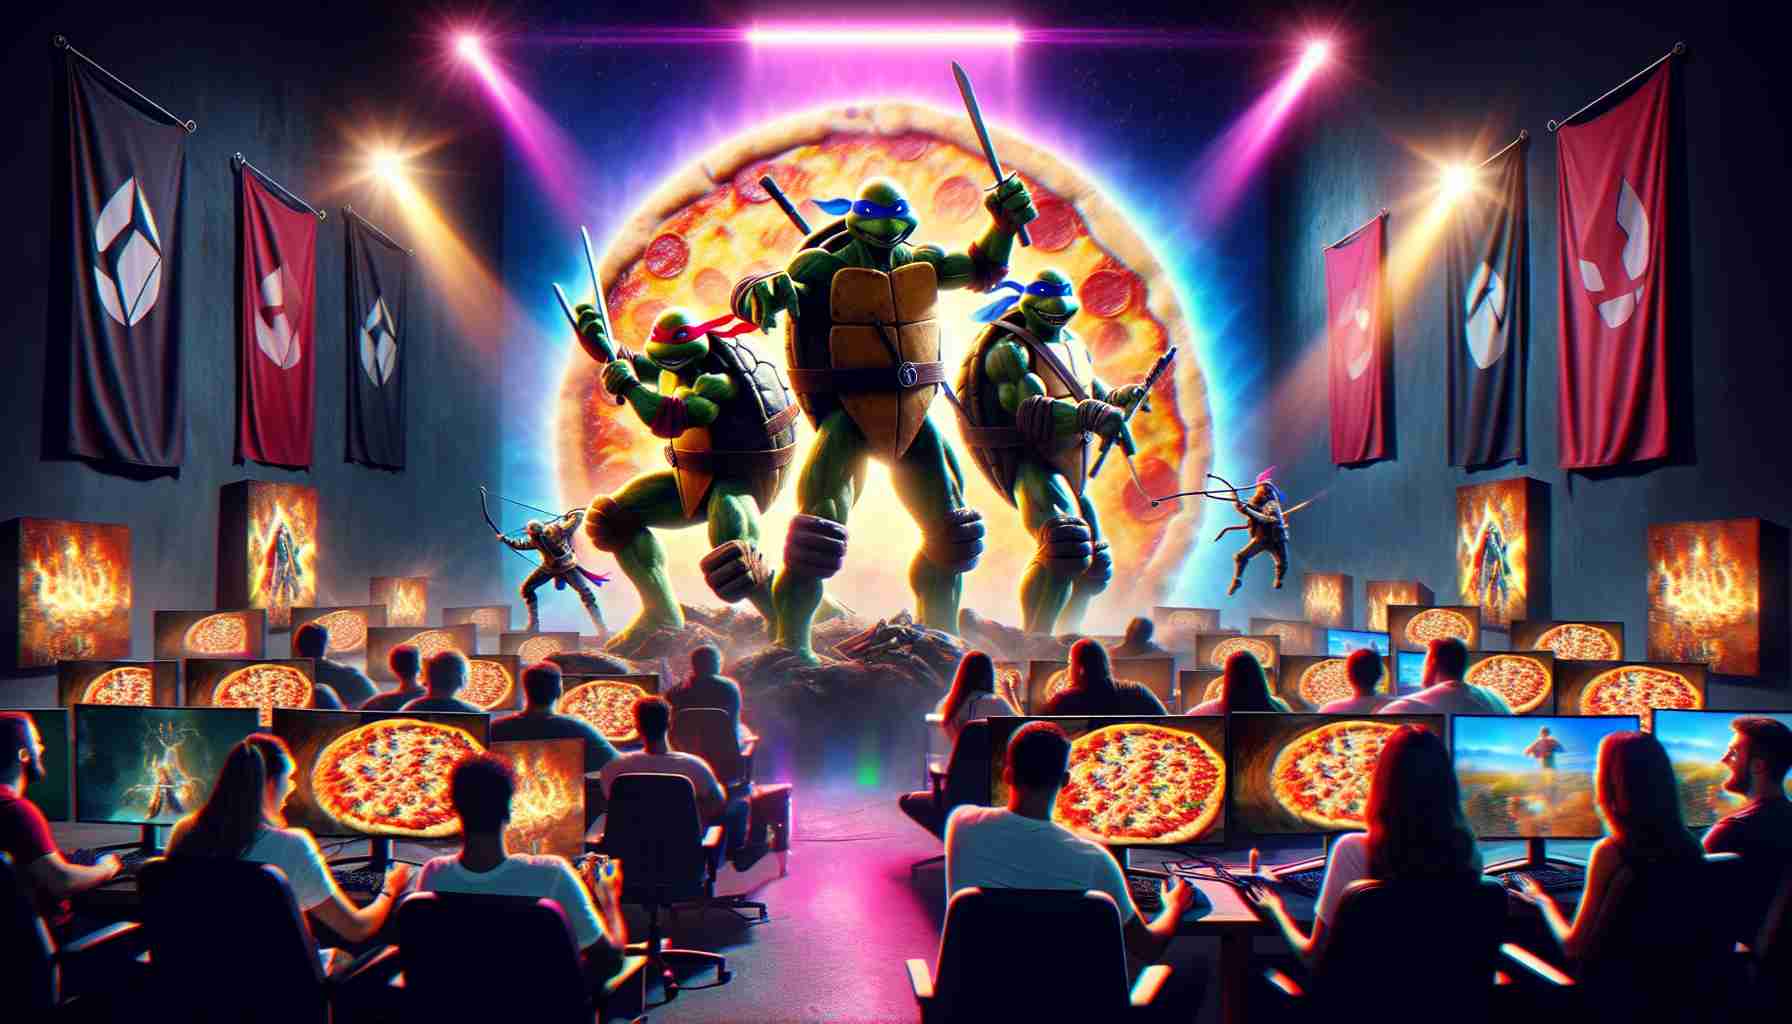 Excitement Builds for Fortnite’s Next Patch with TMNT Collaboration